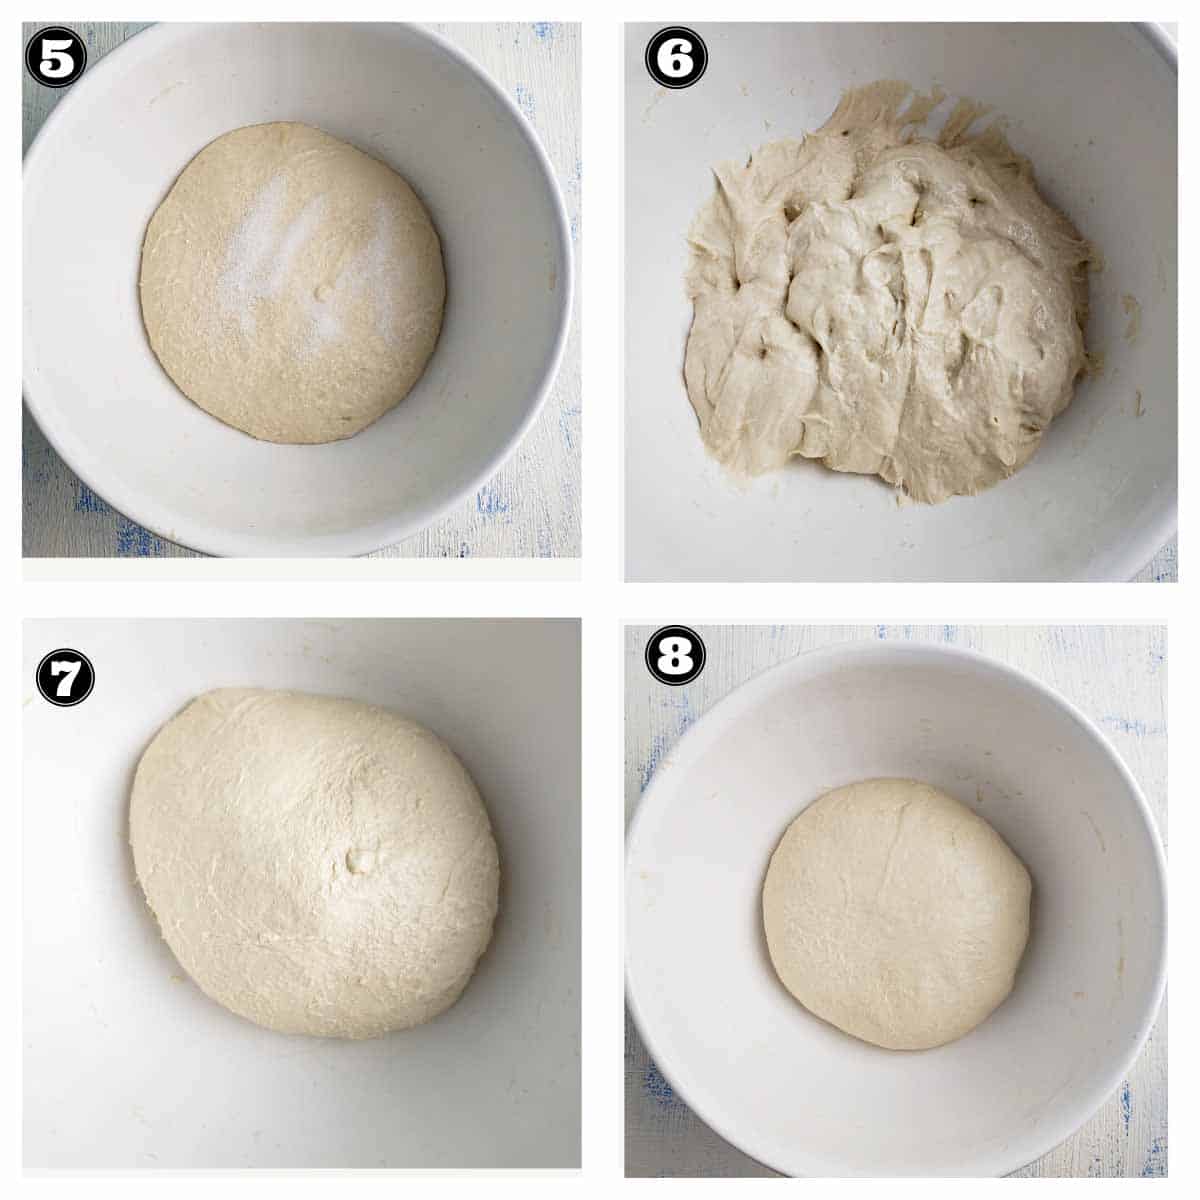 images showing adding salt to the dough